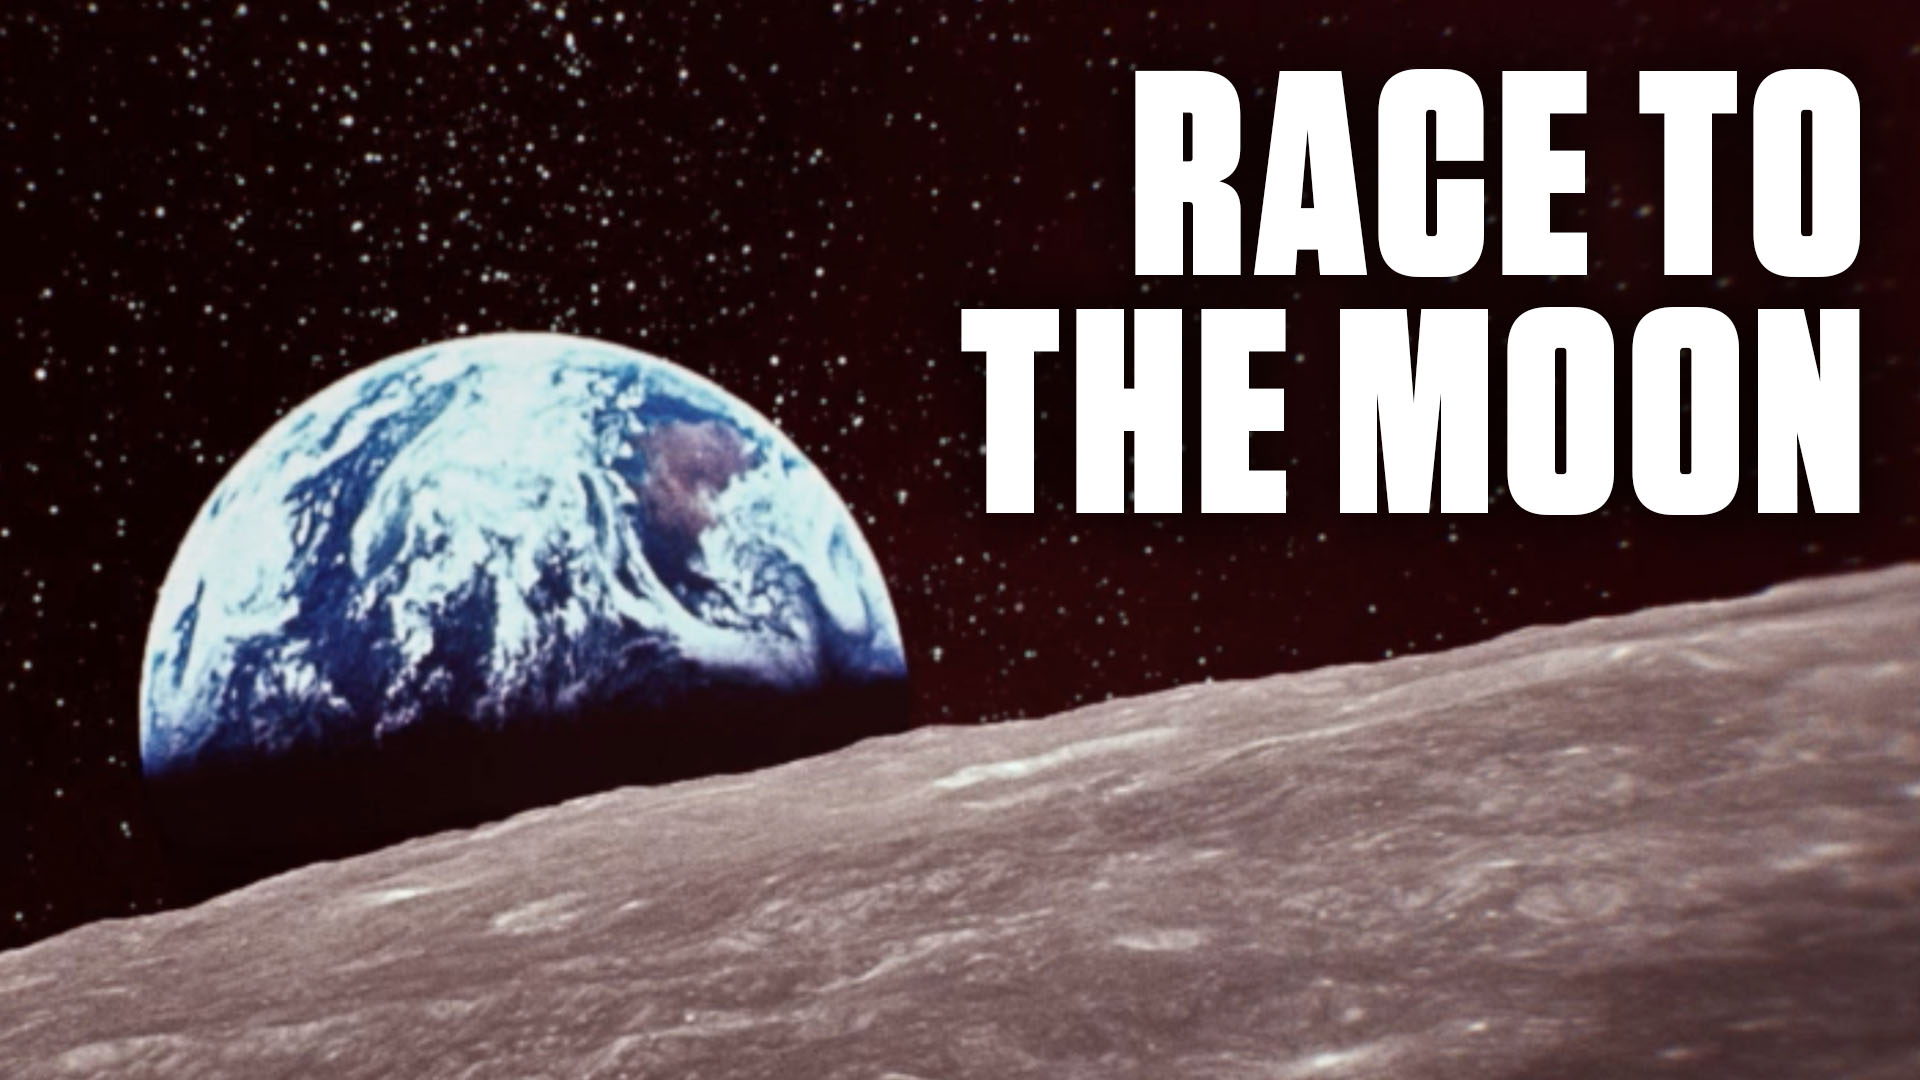 Go to the Moon. Race to the Moon. What if Russians on the Moon! Documentary. We never went to the Moon. Races the moon